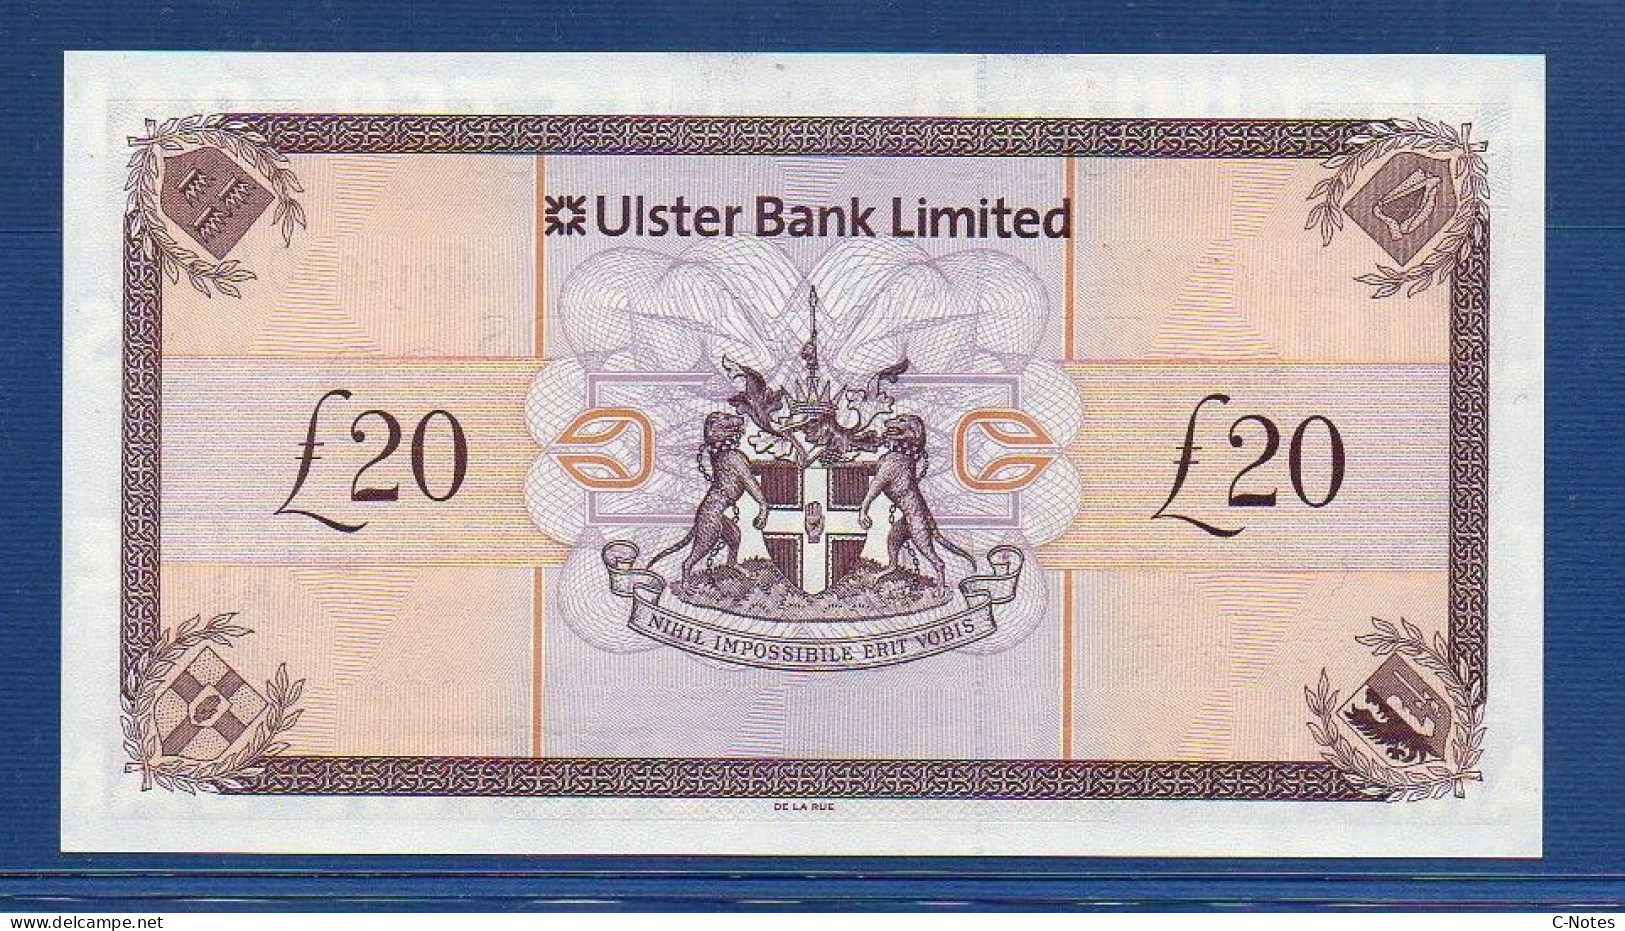 NORTHERN IRELAND - P.342a – 20 POUNDS 01.01.2007 UNC, S/n G0149904 Ulster Bank Limited - 20 Pounds